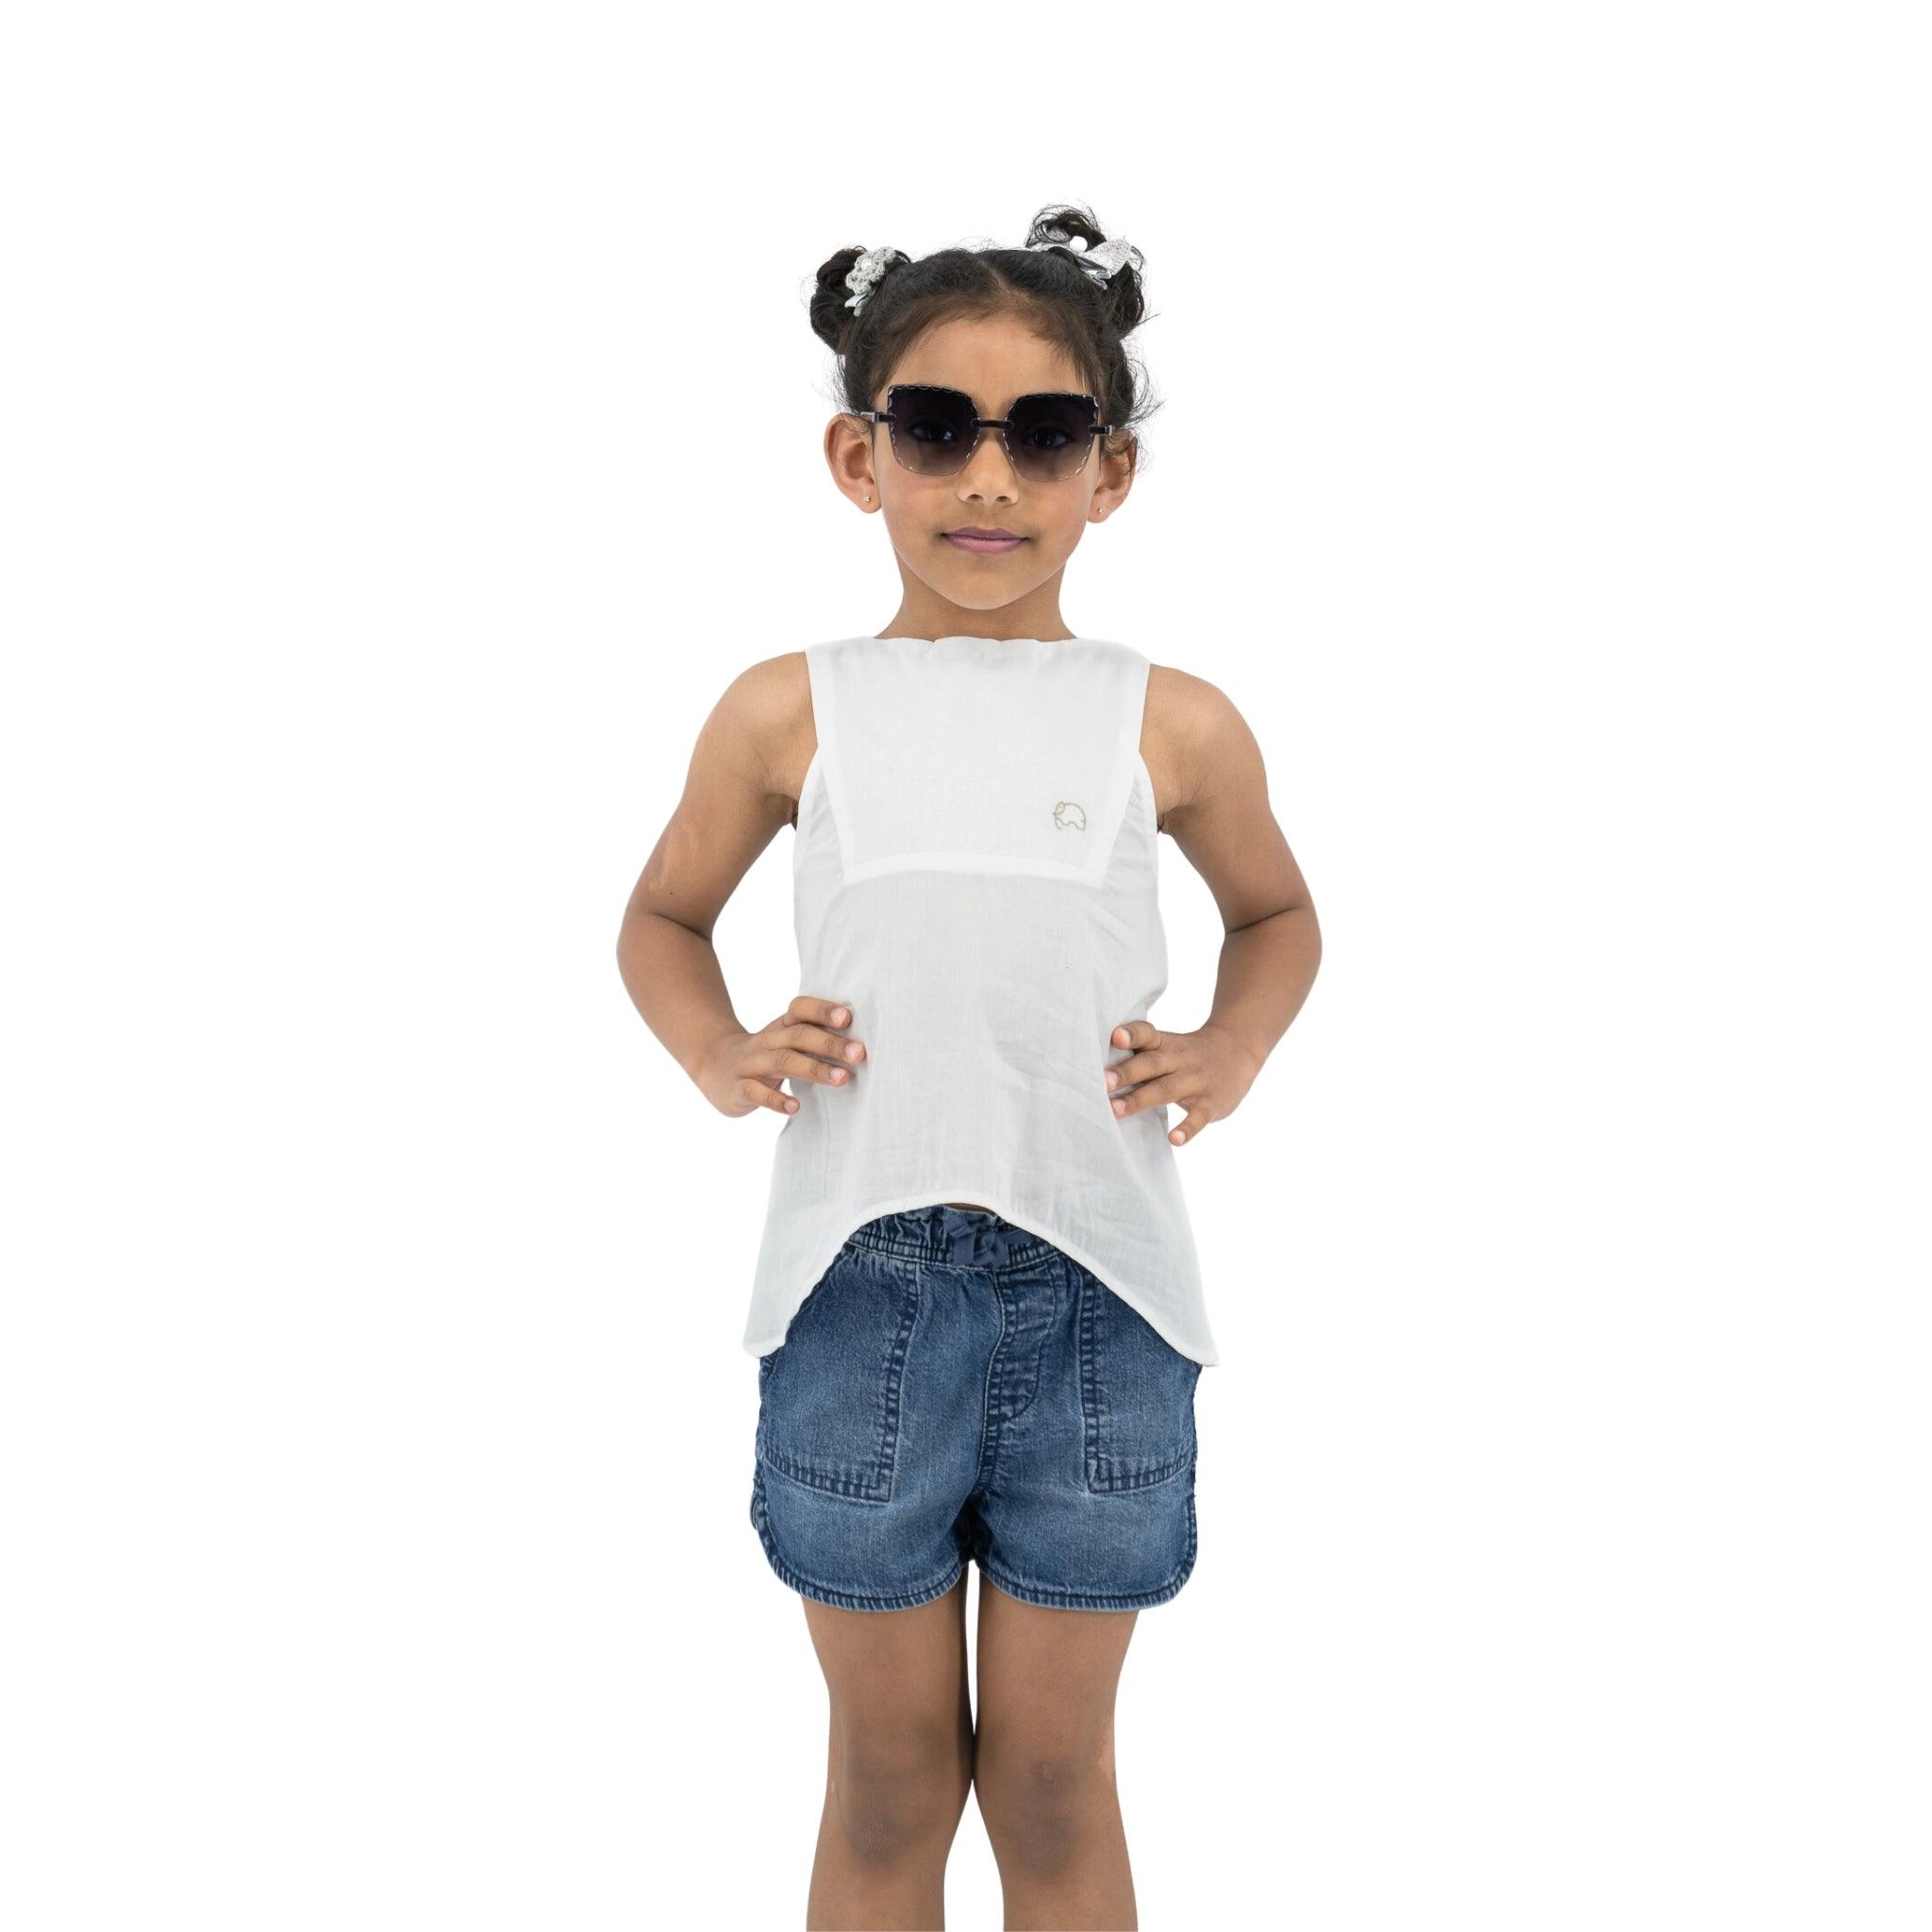 Young girl standing with hands on hips, wearing sunglasses, a Karee Brilliant White Cotton Bib Neck Top for kids and denim shorts.